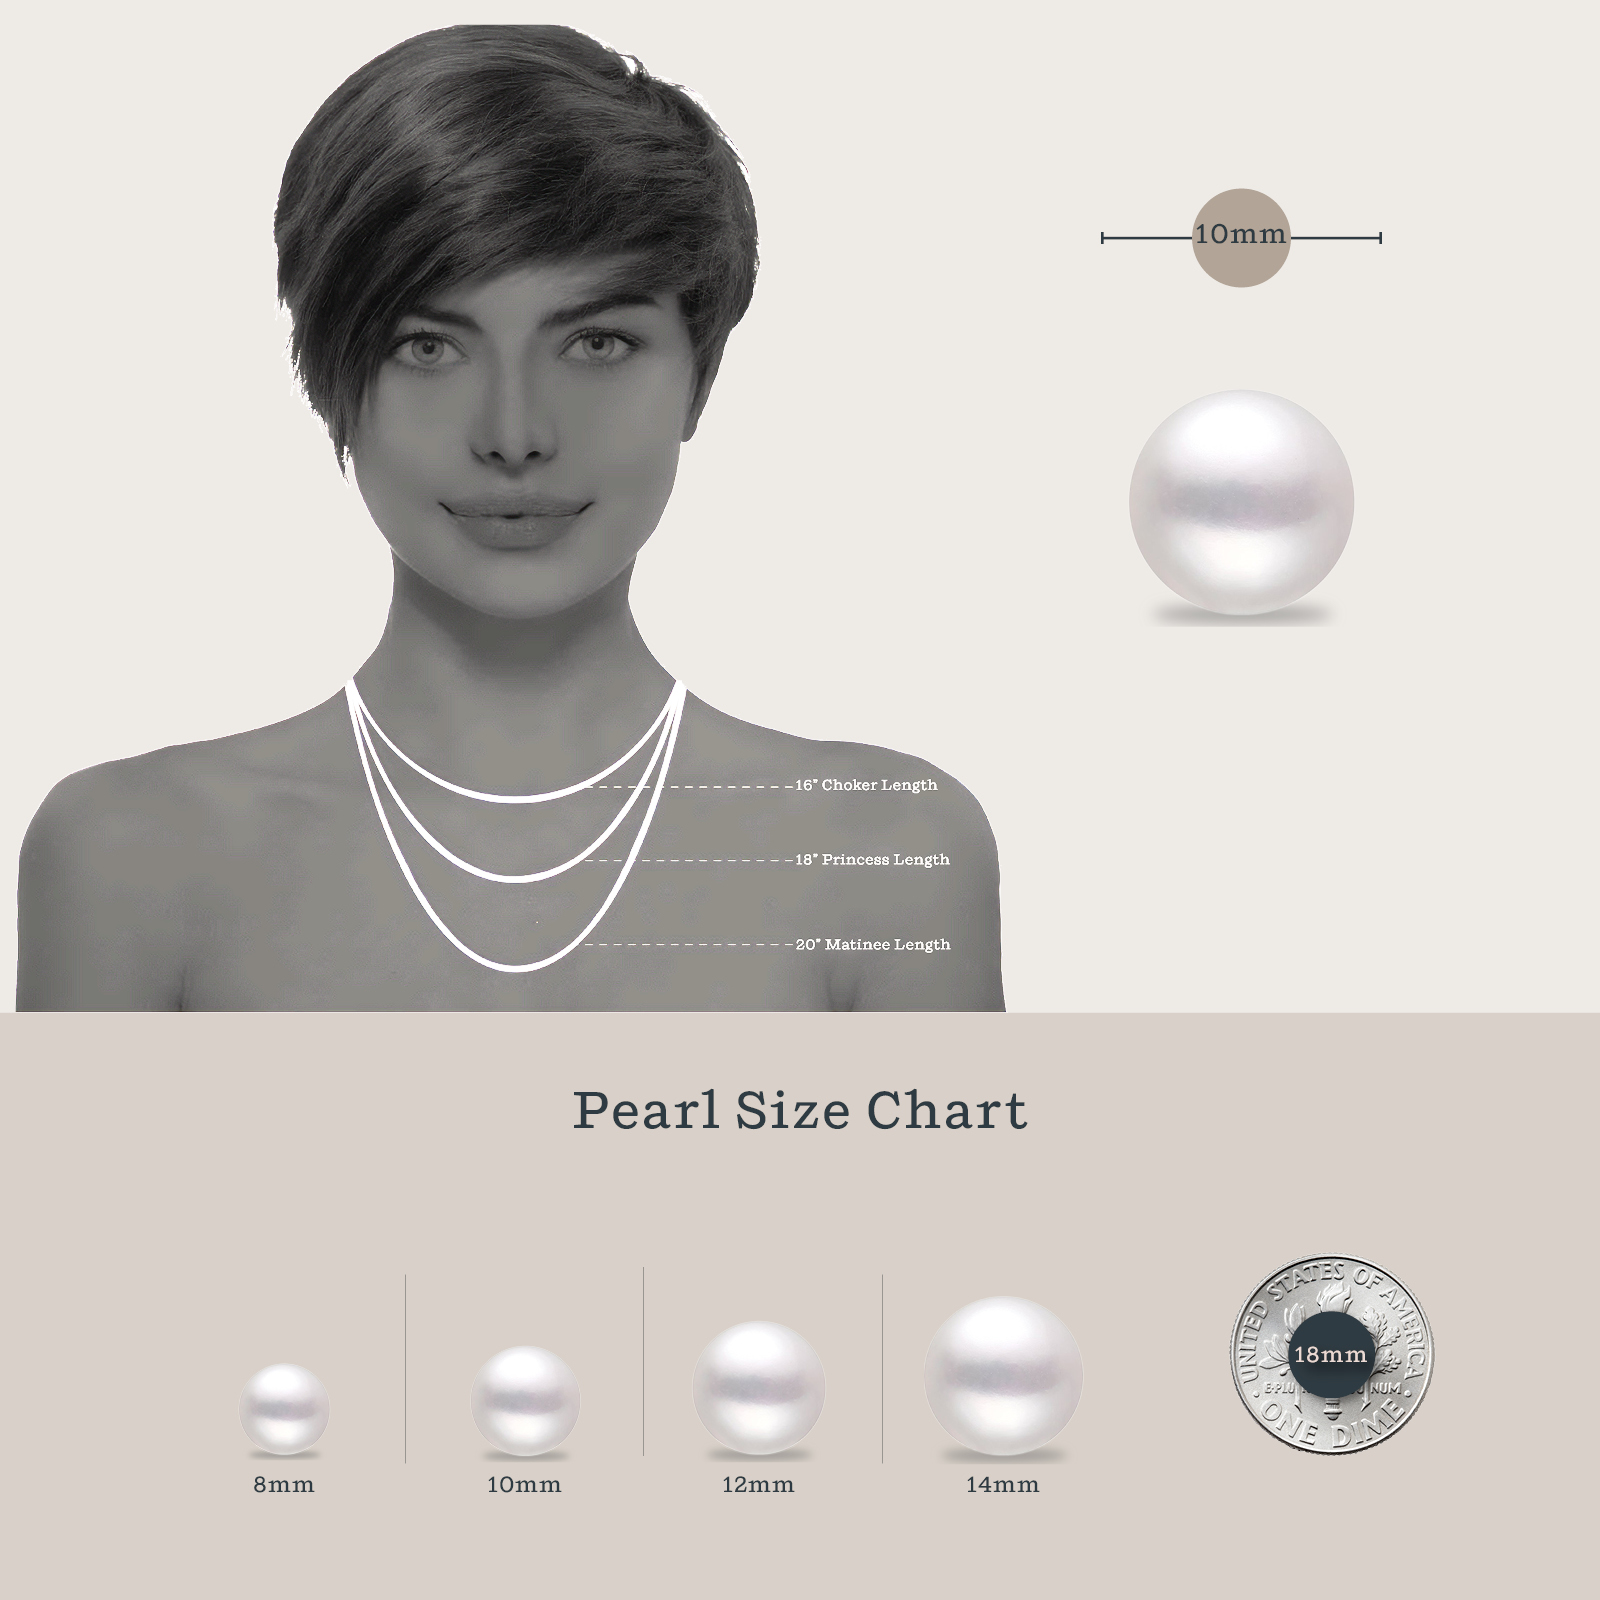 KEZEF Faux Pearl Necklace Cream White Simulated Pearls Necklace for Women 16" - Pearl Necklace for Men - Pearl Size: 10mm Pearls - image 3 of 7